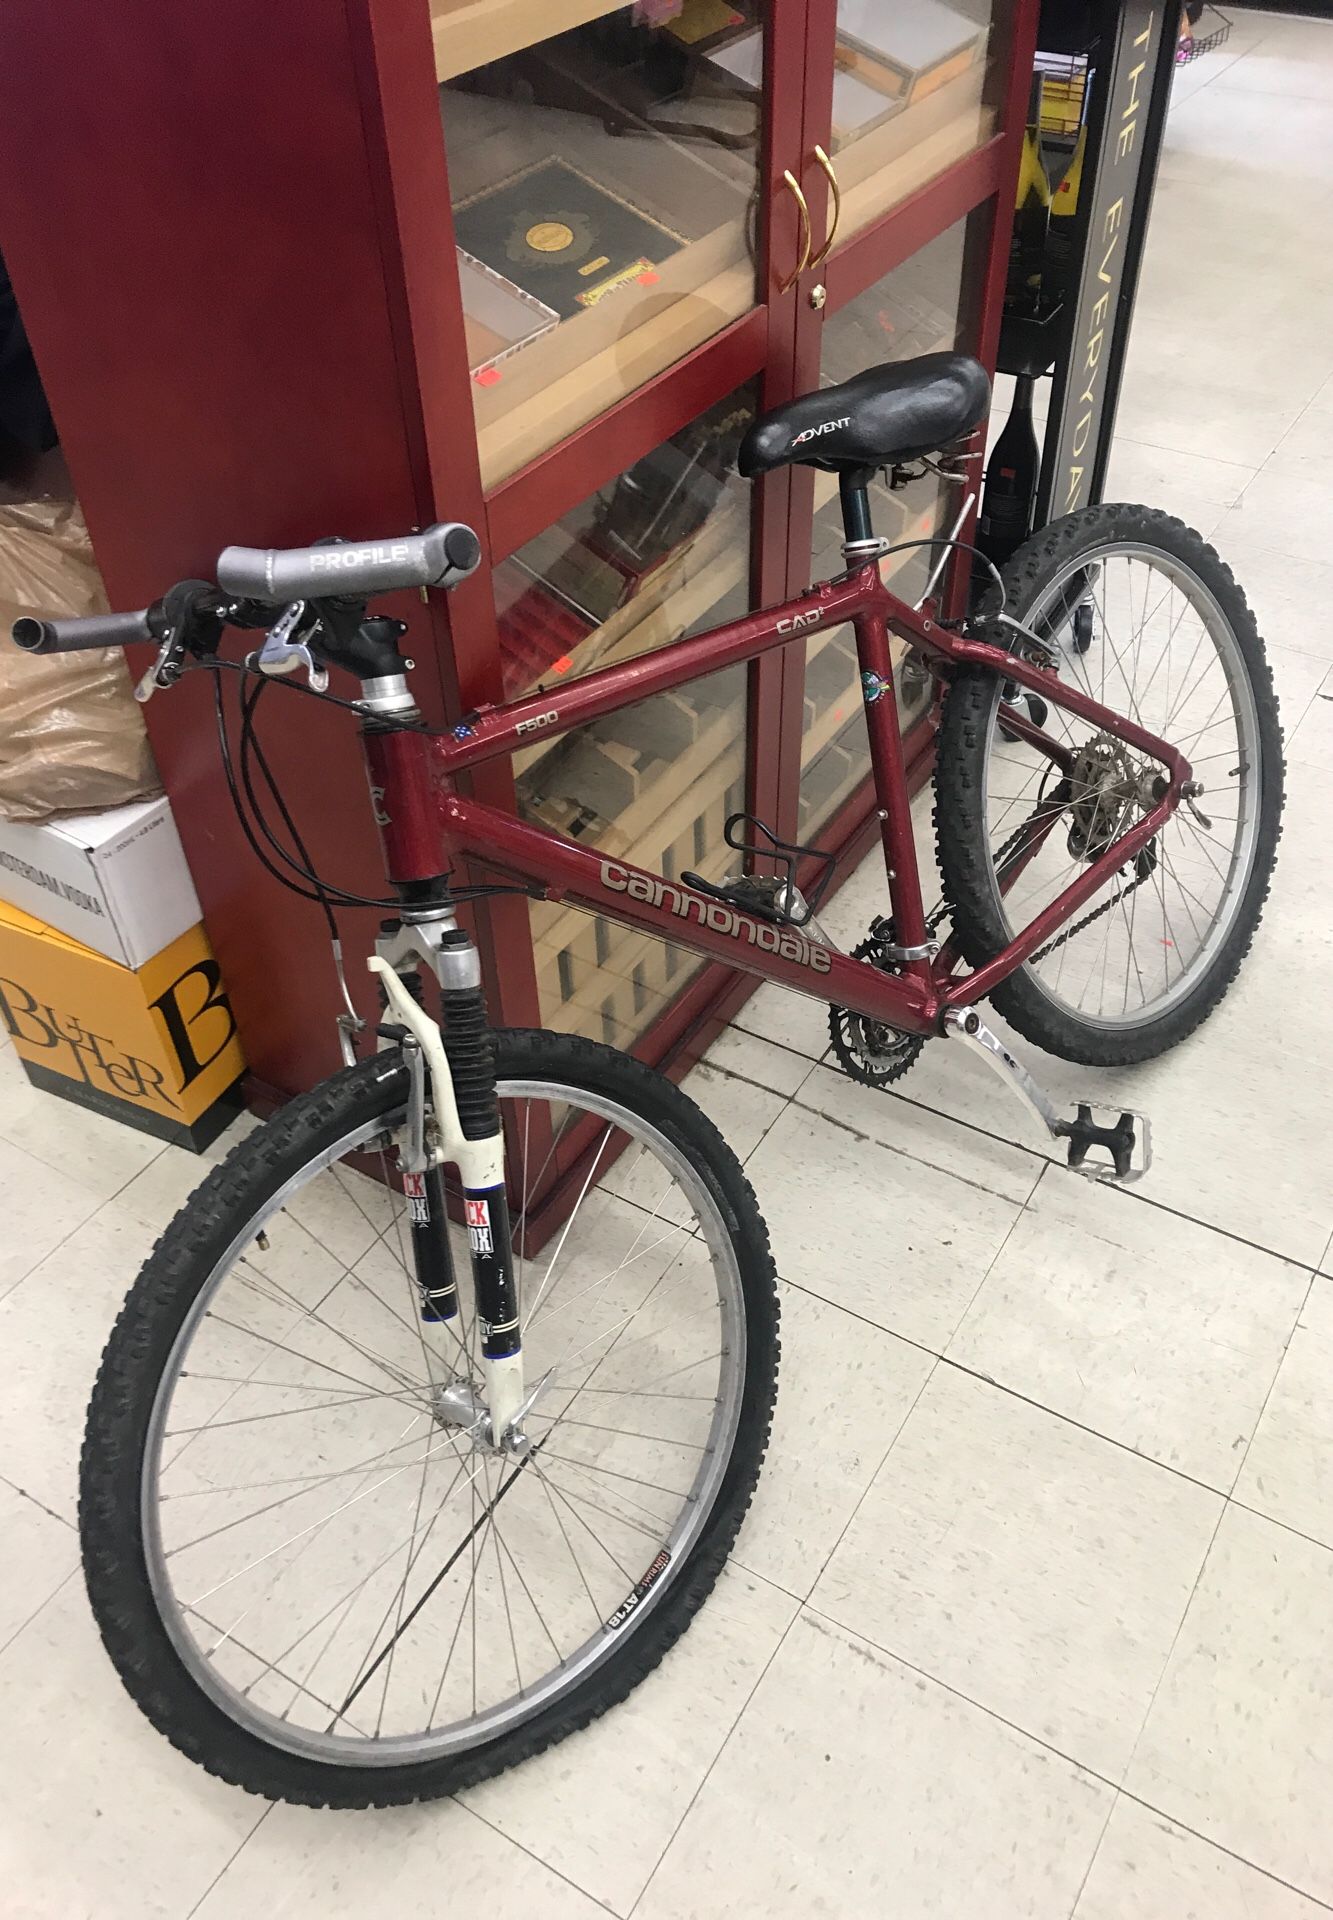 Cannondale f500 cad2 mountain bike